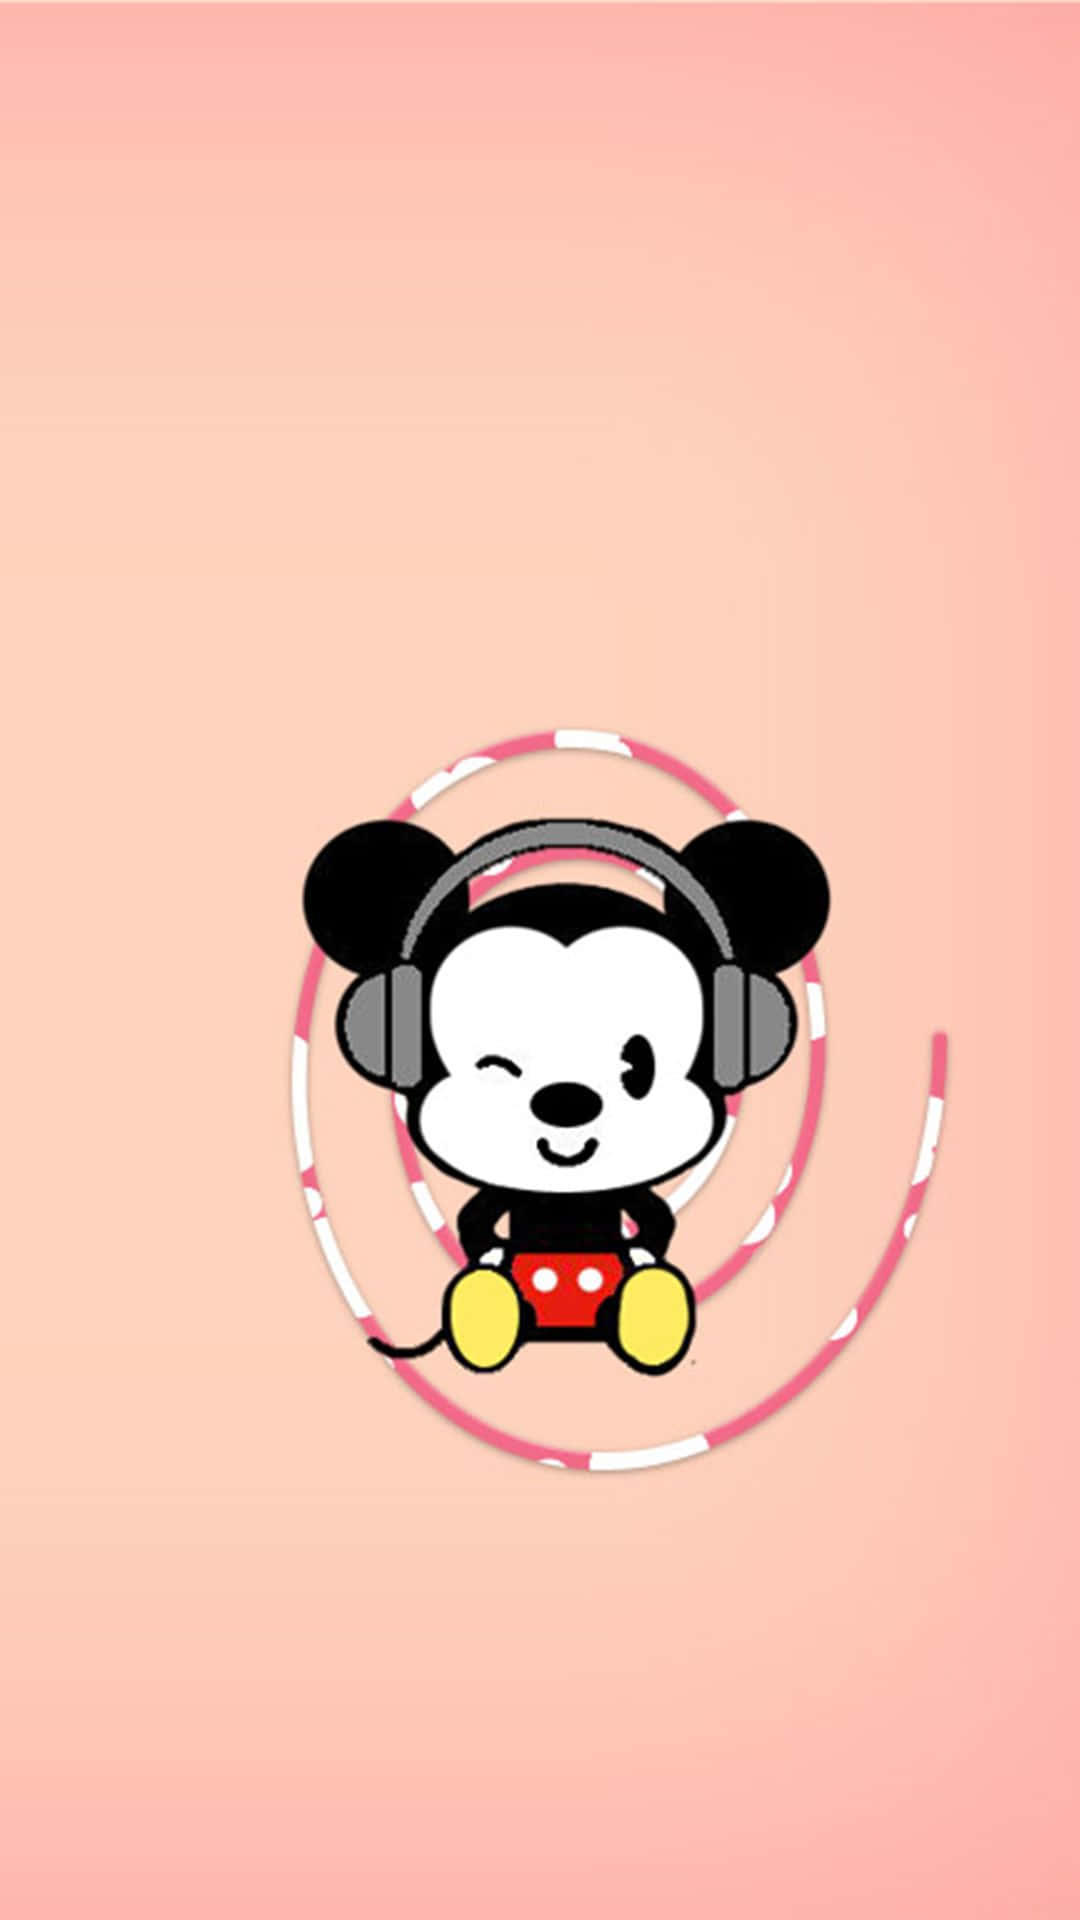 Minnie Mouse Wallpaper Discover more Android Background Iphone Lock  Screen Pink w  Mickey mouse wallpaper Minnie mouse drawing Mickey  mouse wallpaper iphone